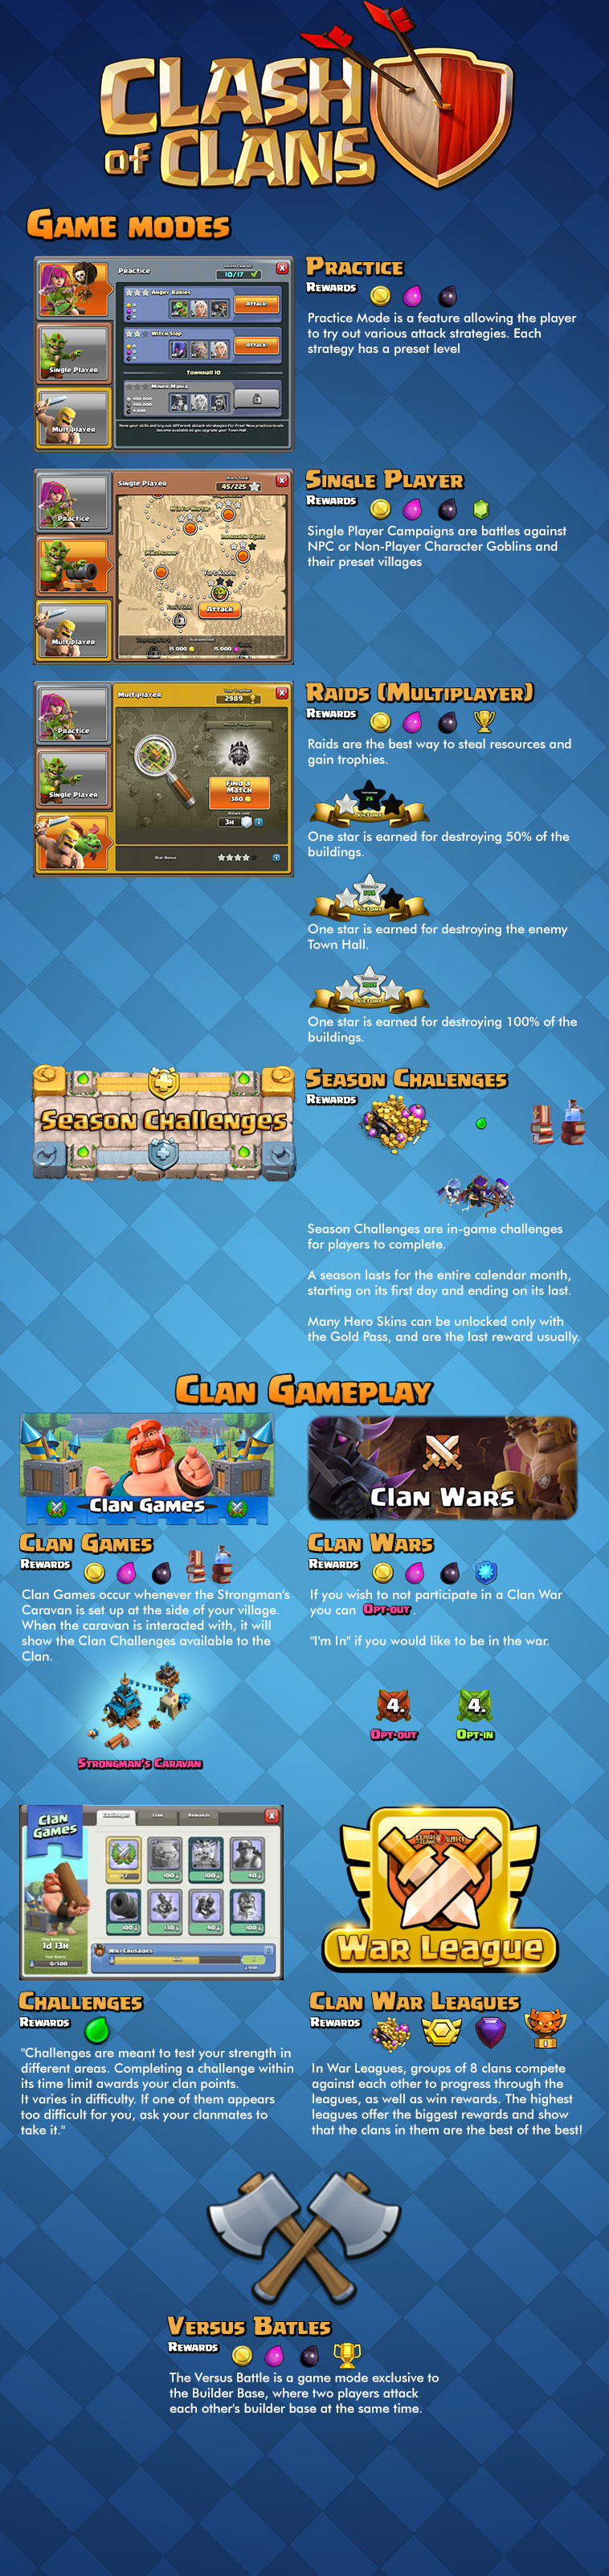 Clash of Clans Gameplay Guide